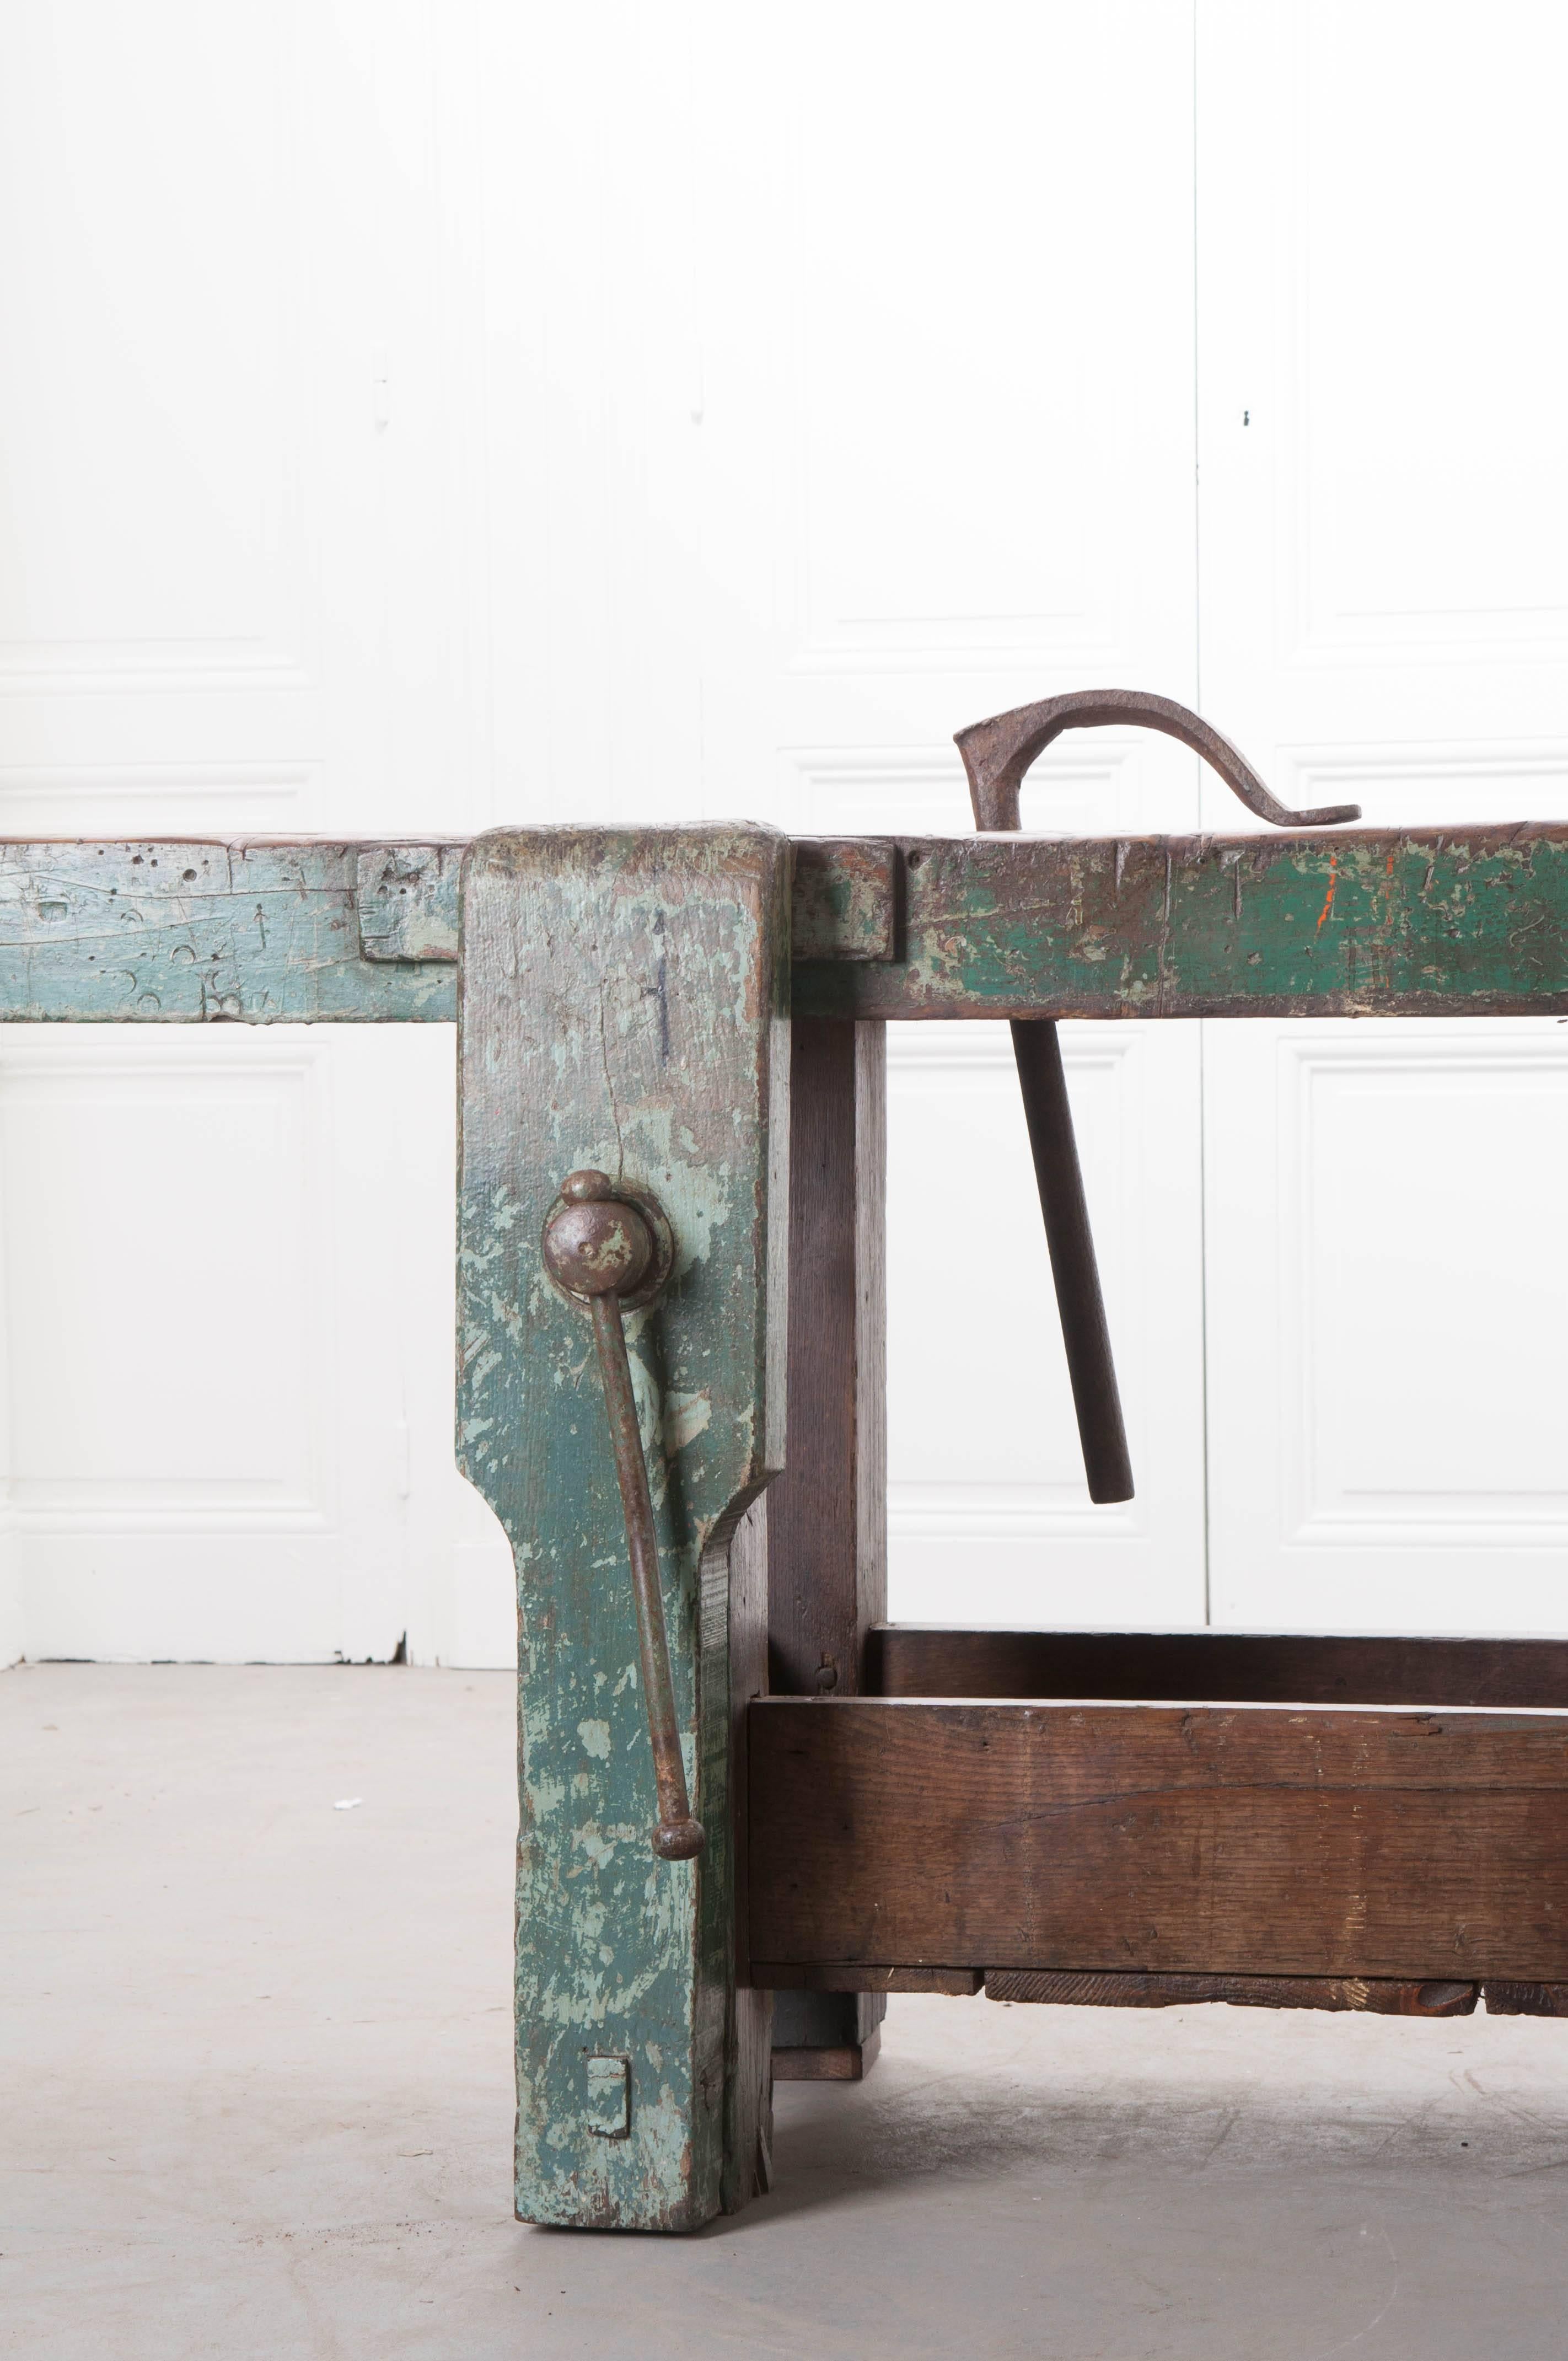 Numerous projects have been completed over the years using this painted 19th century English workbench. Deep marks are scored into every inch of the work surface, left there by the saws of craftsmen from long ago. Interesting features include a